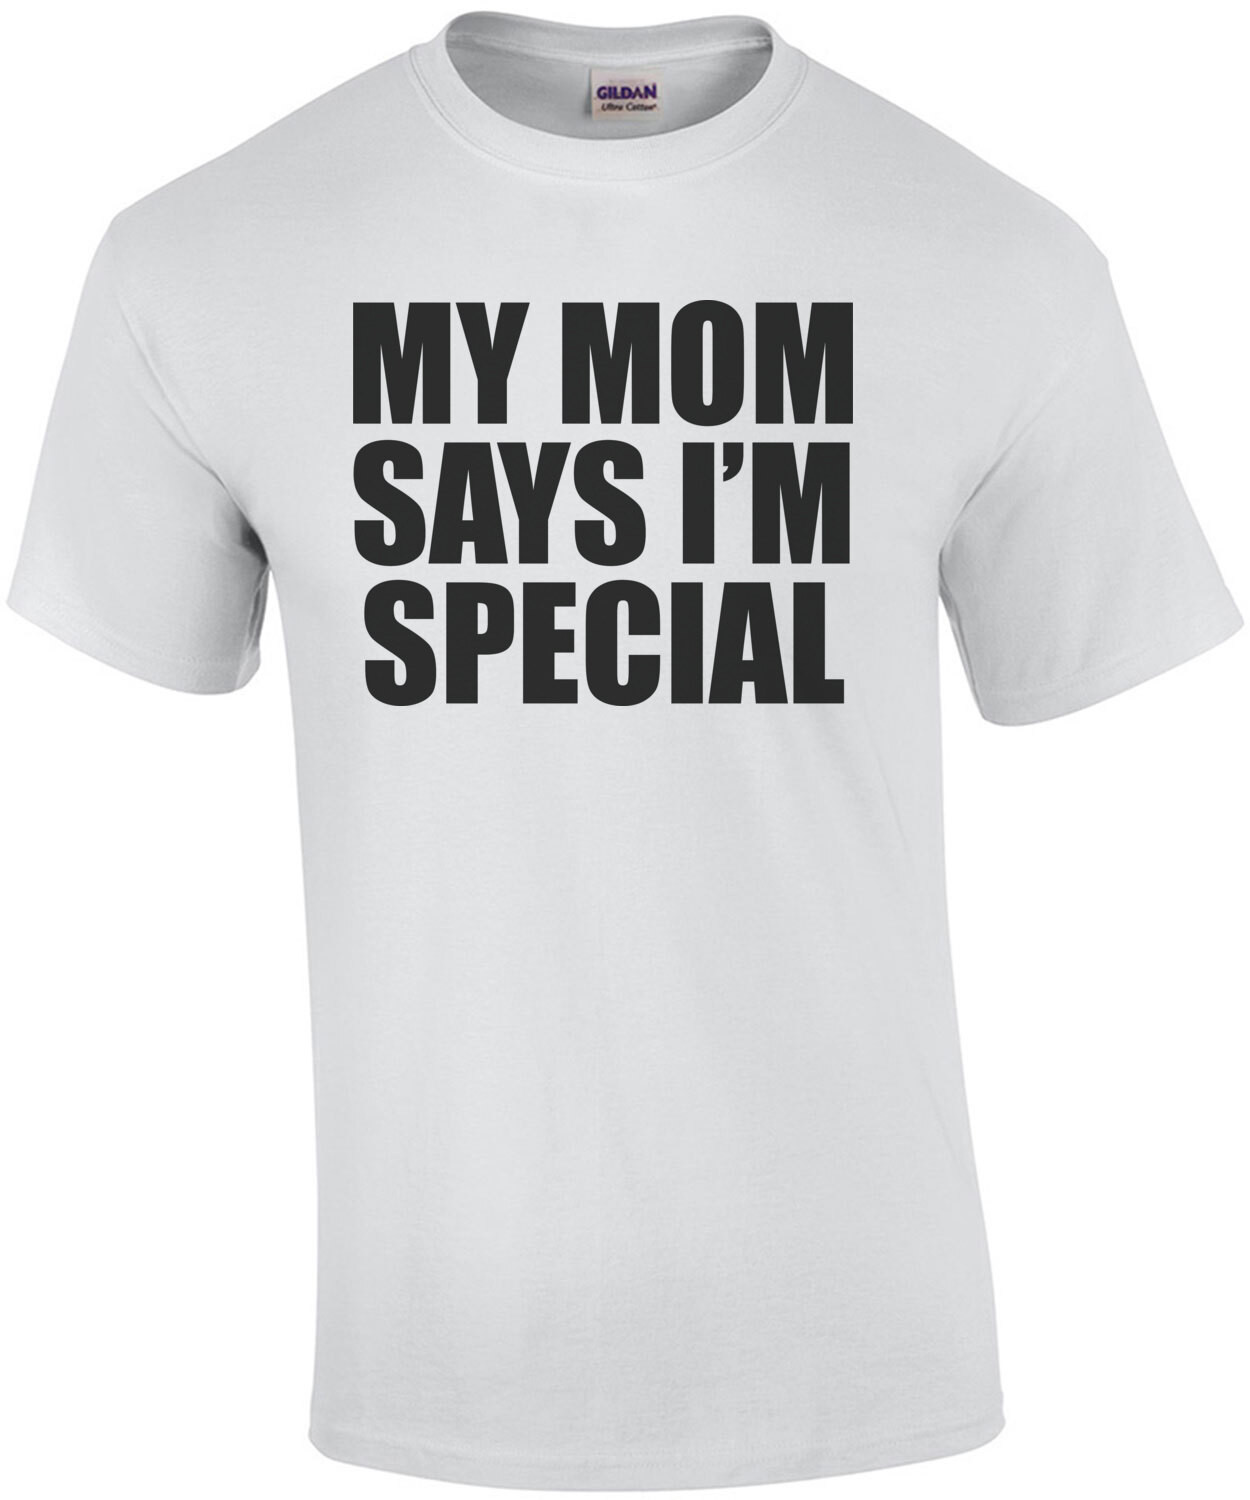 My Mom Says I'm Special - Funny Sarcastic T-Shirt